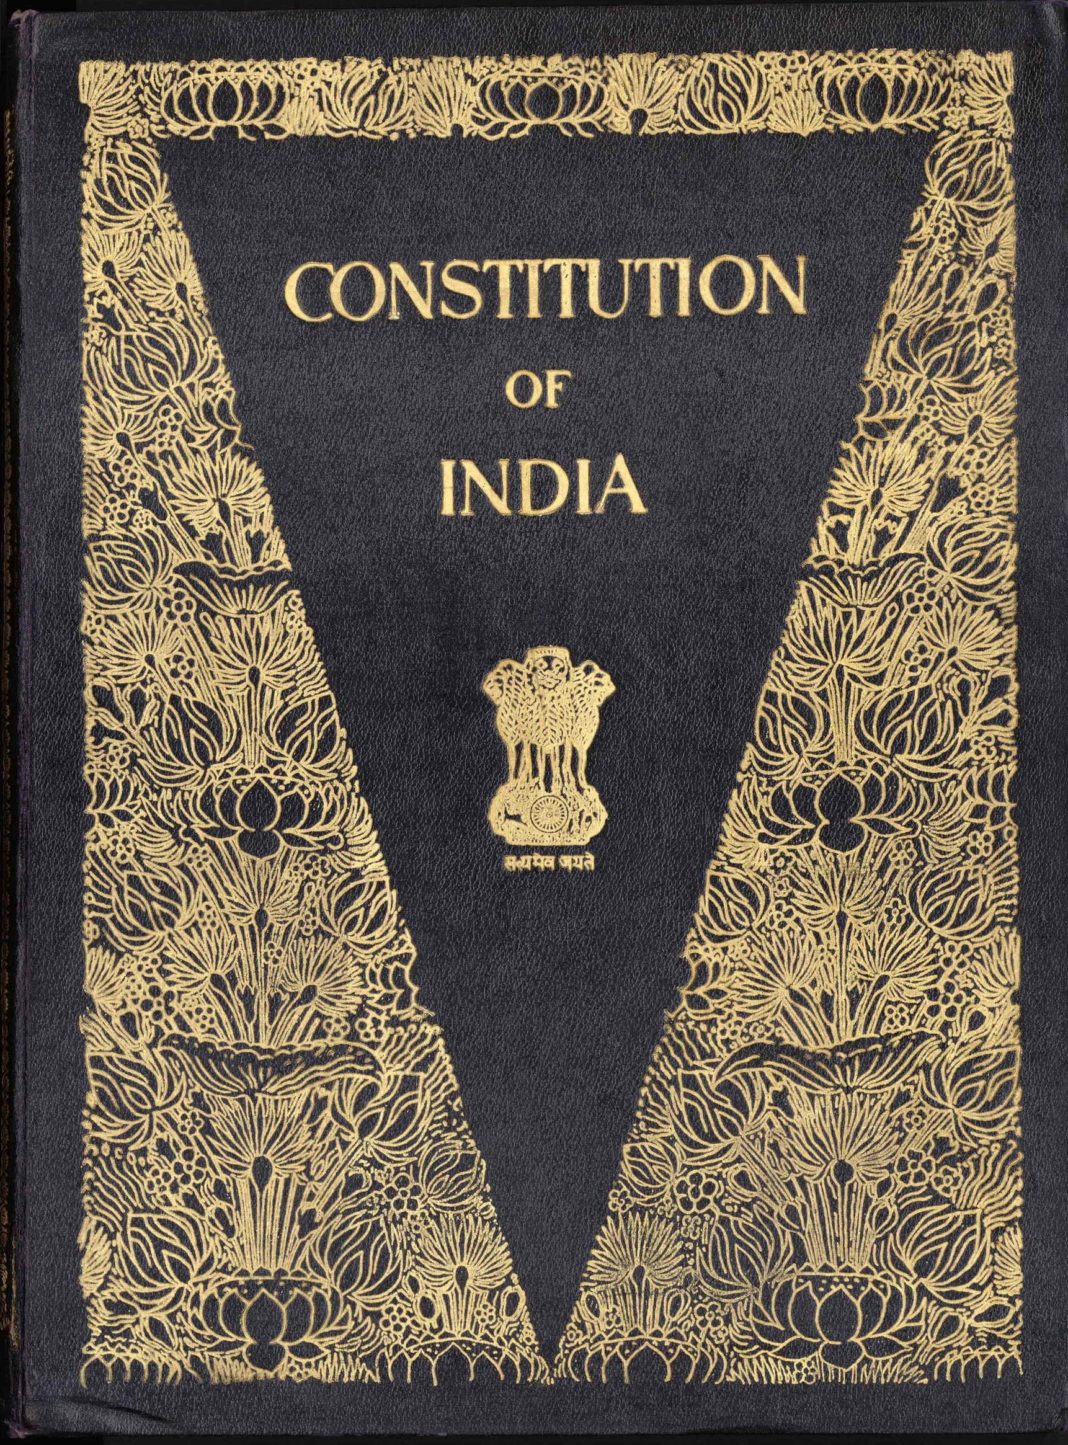 presentation on constitution of india